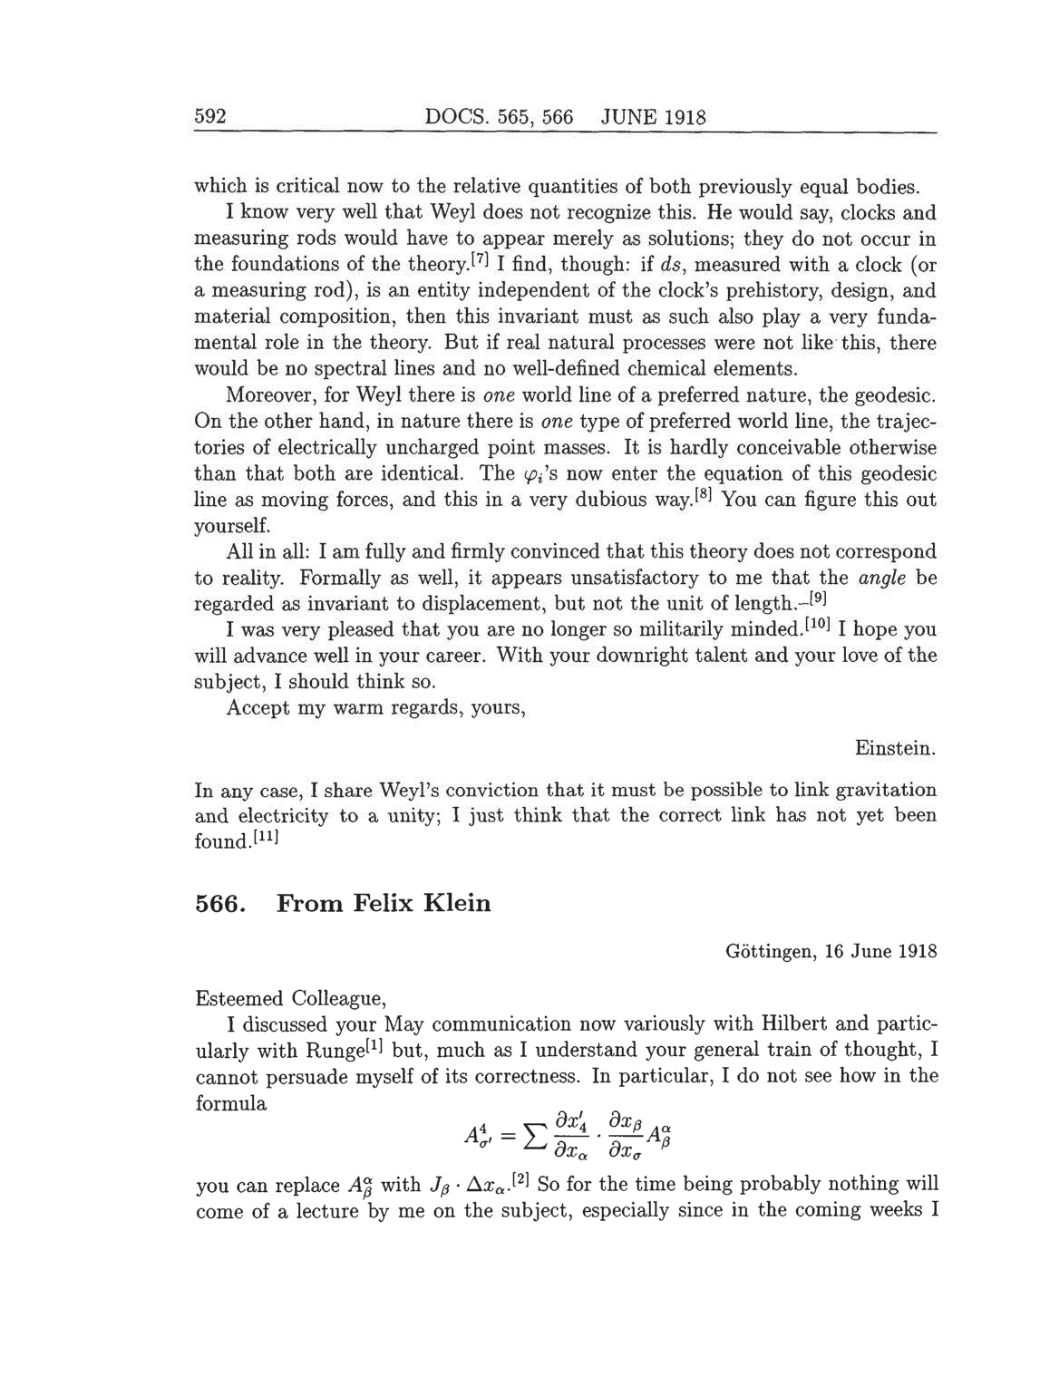 Volume 8: The Berlin Years: Correspondence, 1914-1918 (English translation supplement) page 592